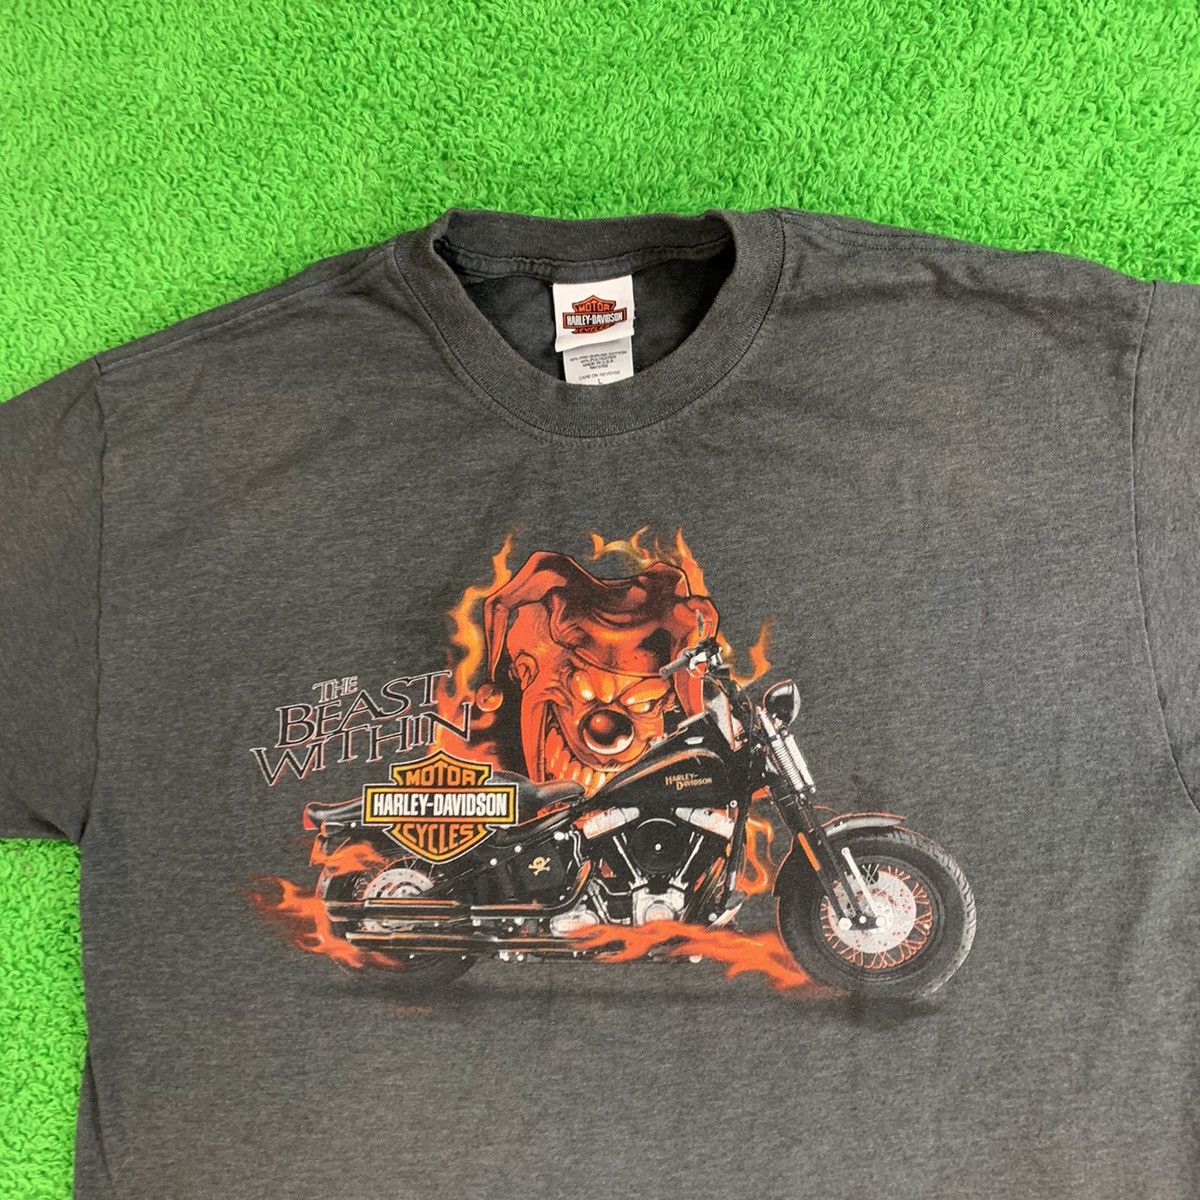 Vintage 2004 The Beast Within Harley Davidson Tshirt Size US L / EU 52-54 / 3 - 2 Preview